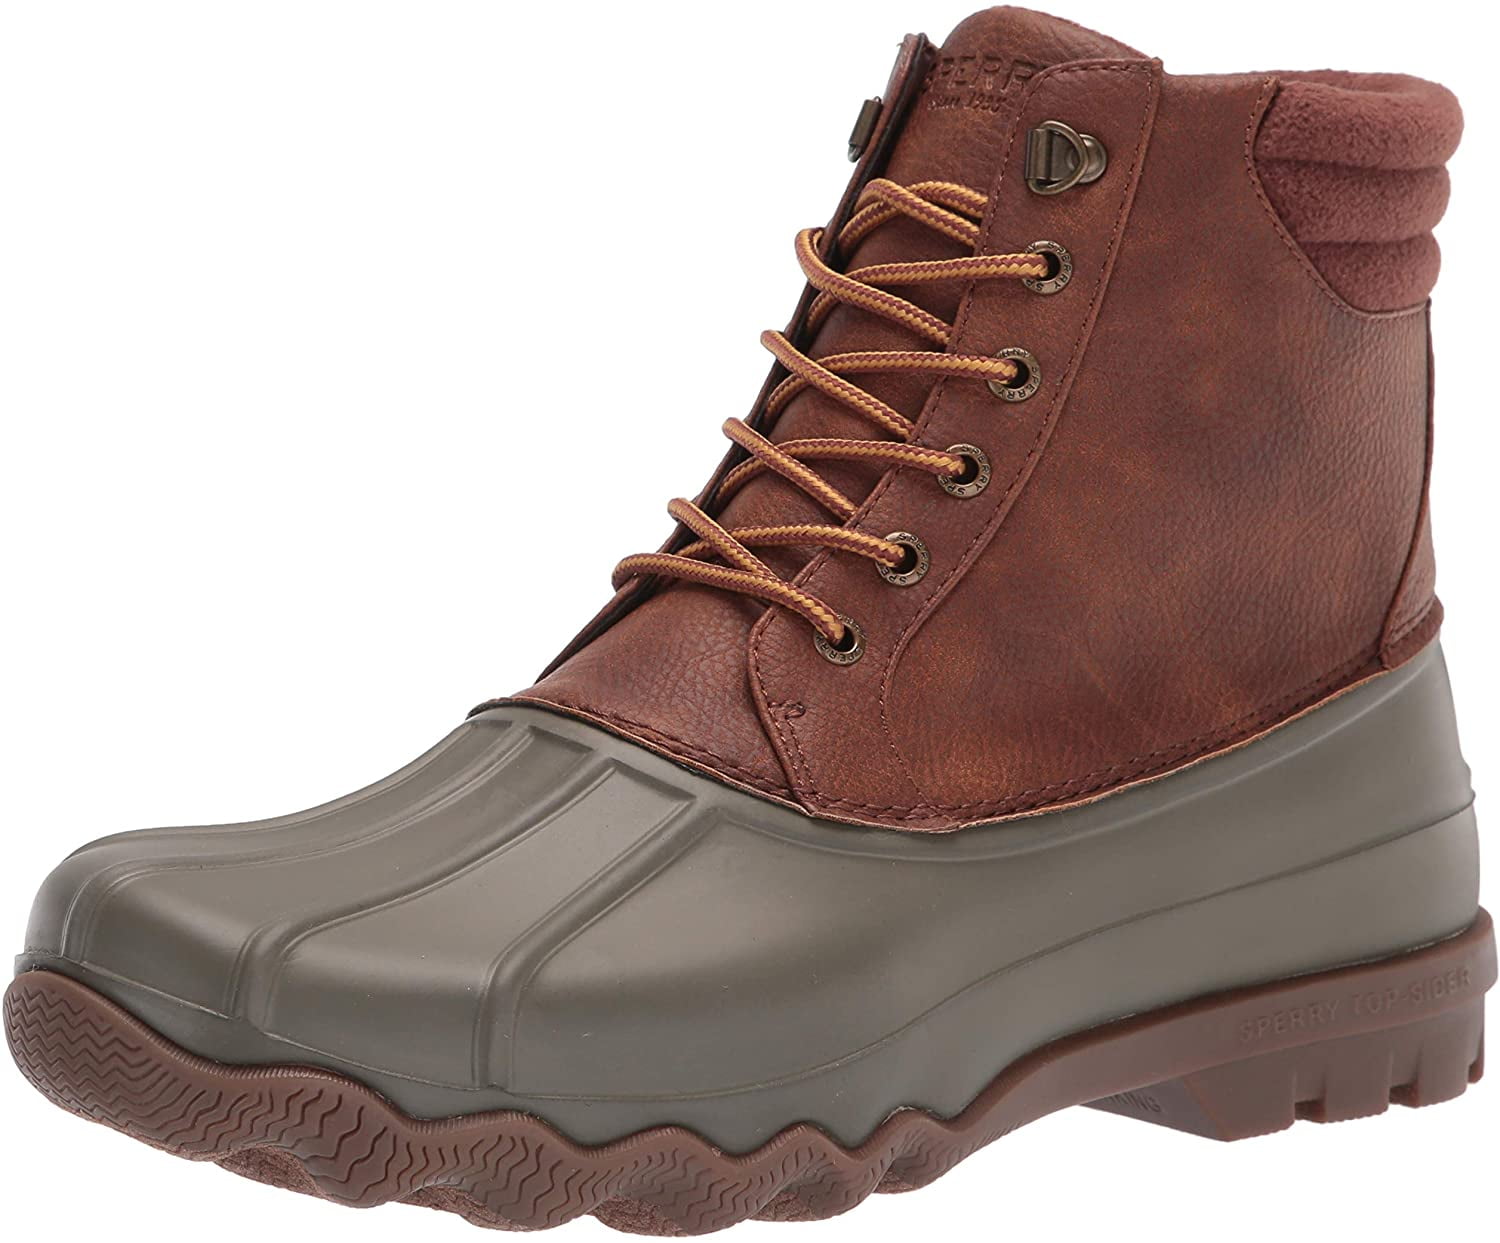 Sperry Top-Sider Mens Avenue Duck Boot Chukka Boot